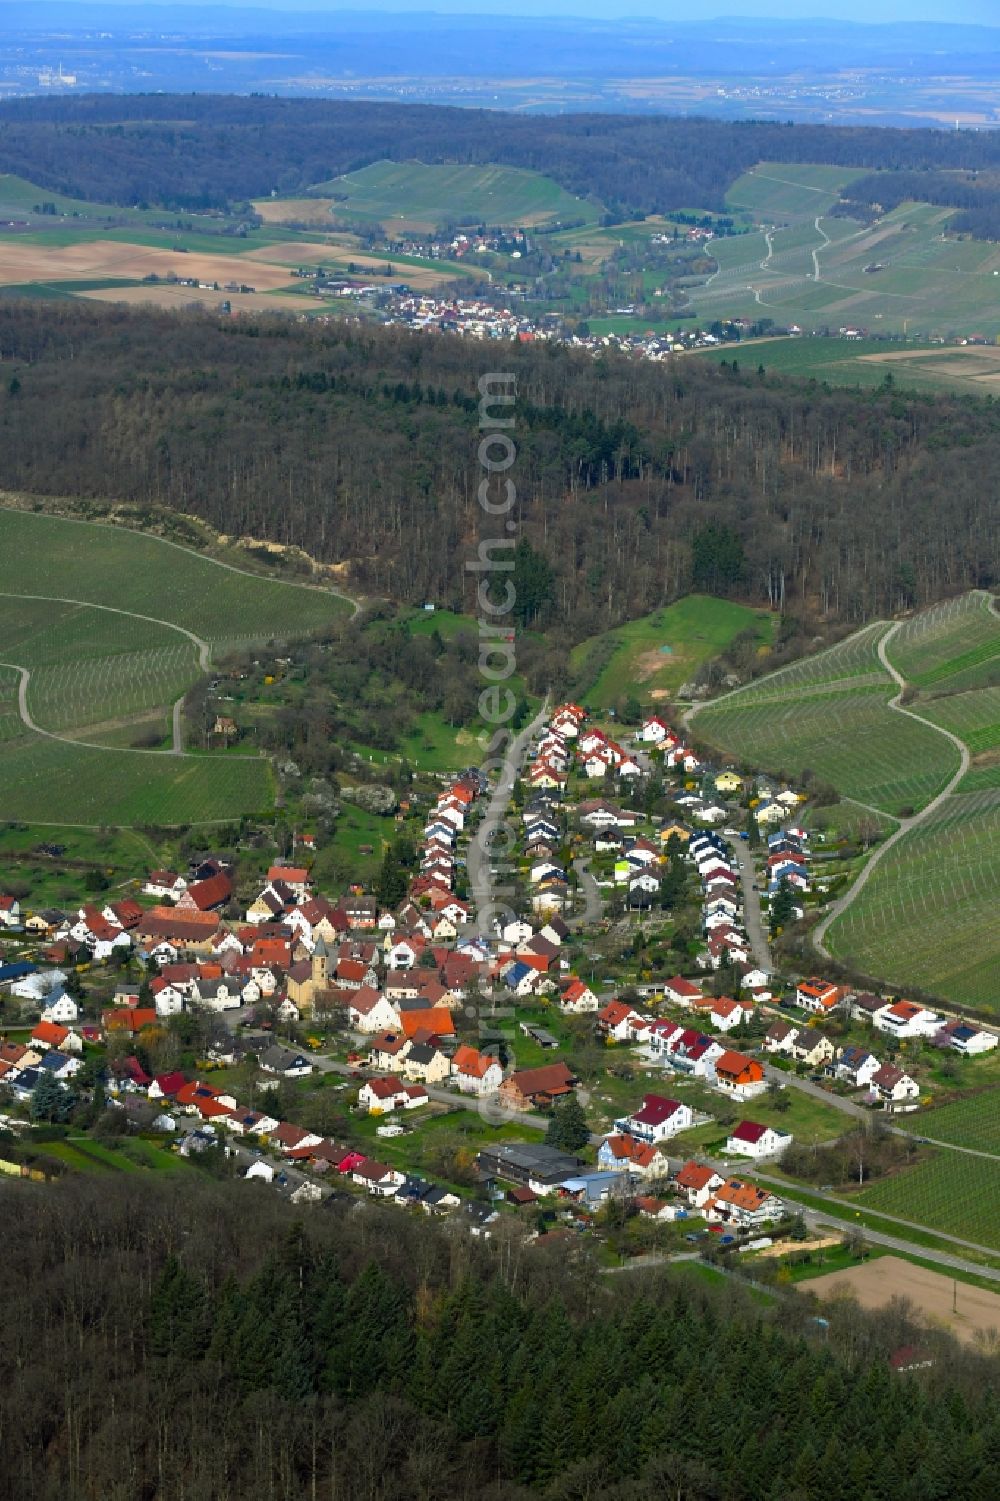 Wimmental from the bird's eye view: Location view of the streets and houses of residential areas in the valley landscape surrounded by mountains in Wimmental in the state Baden-Wurttemberg, Germany